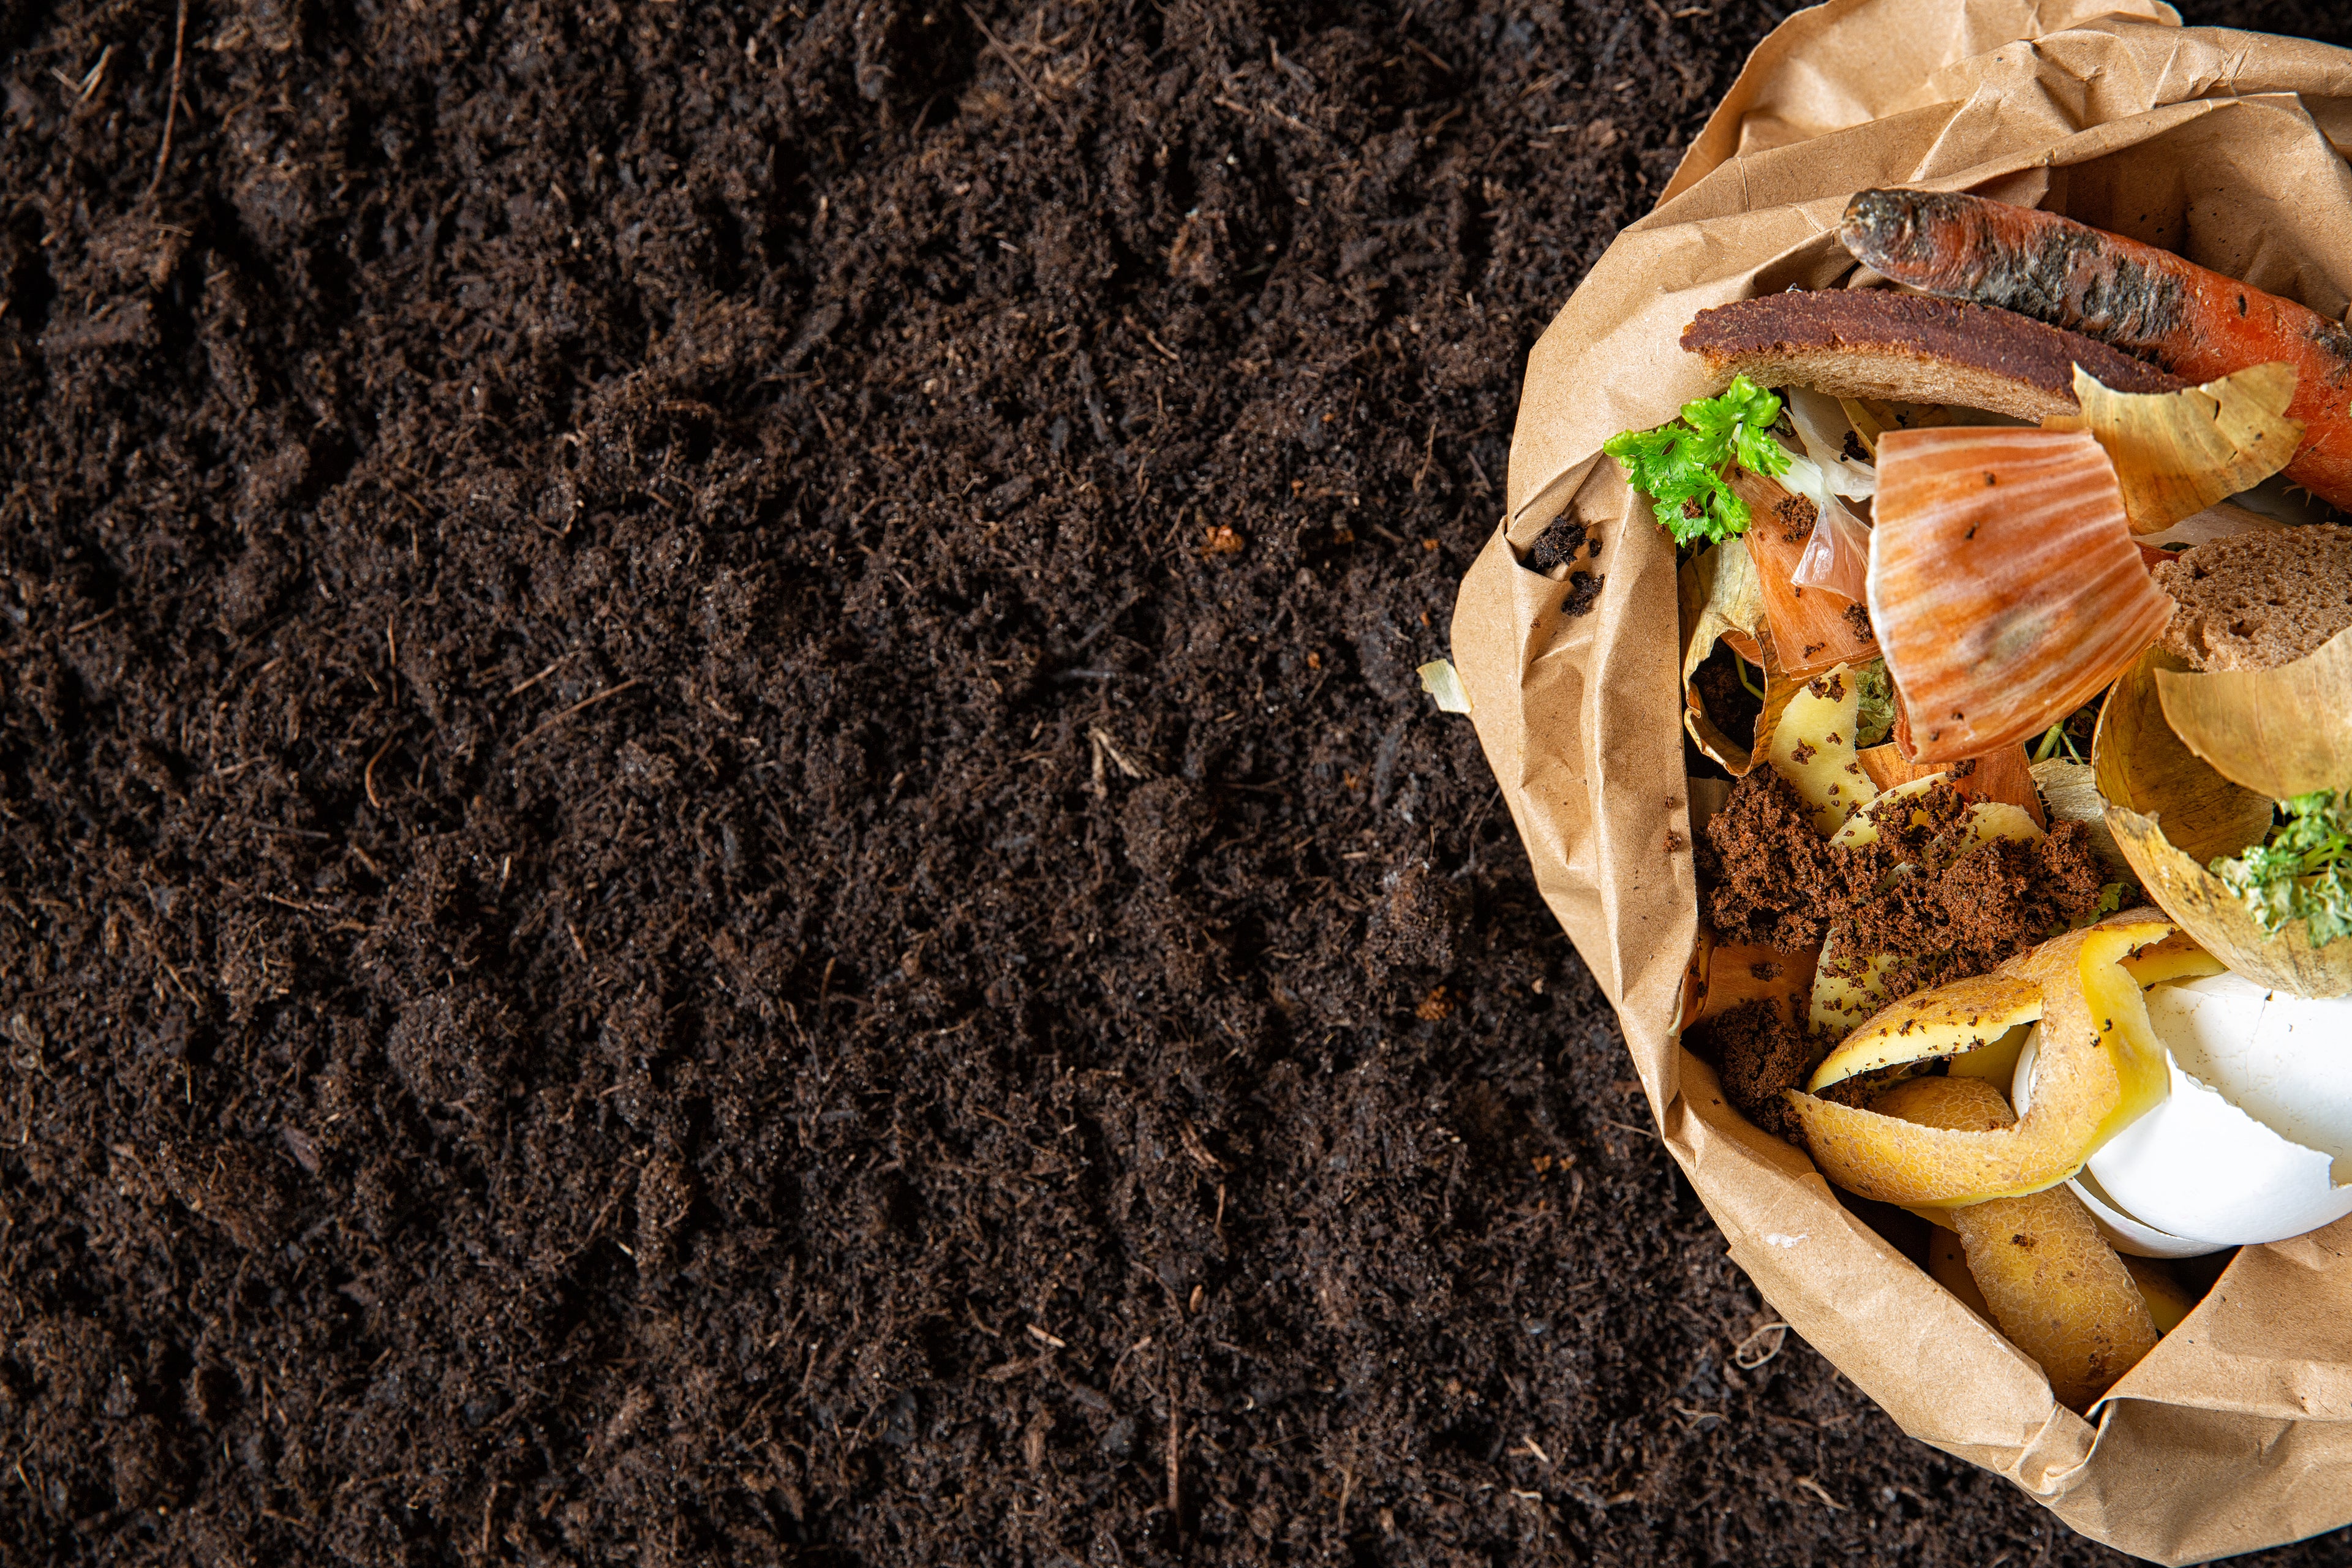 What's The Difference Between Biodegradable and Compostable?